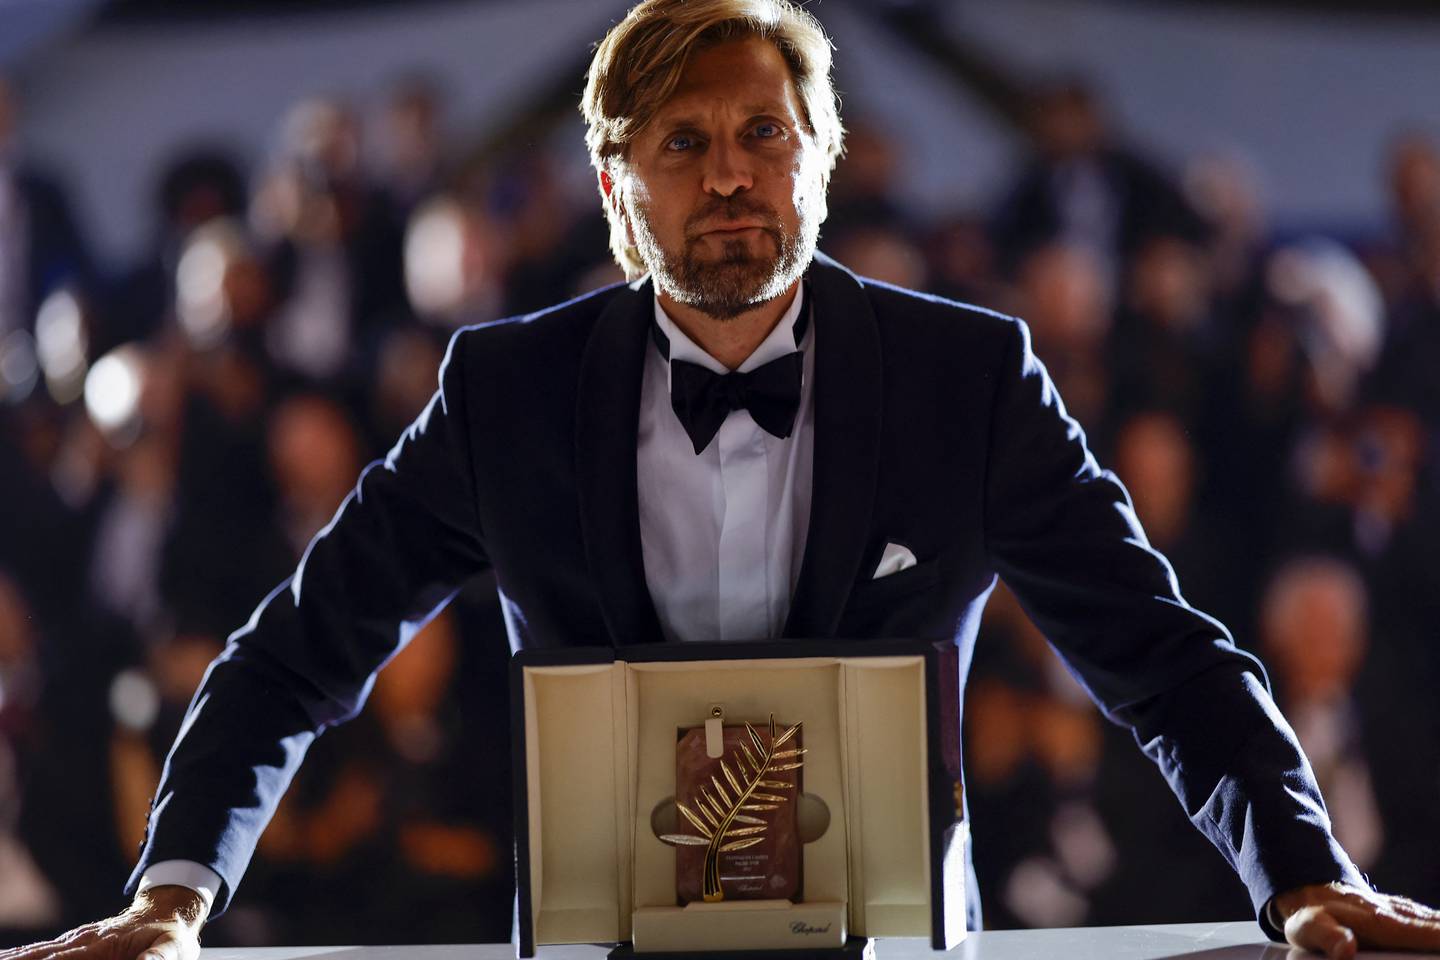 Director Ruben Ostlund won the Palme d'Or for his film 'Triangle of Sadness'. Reuters